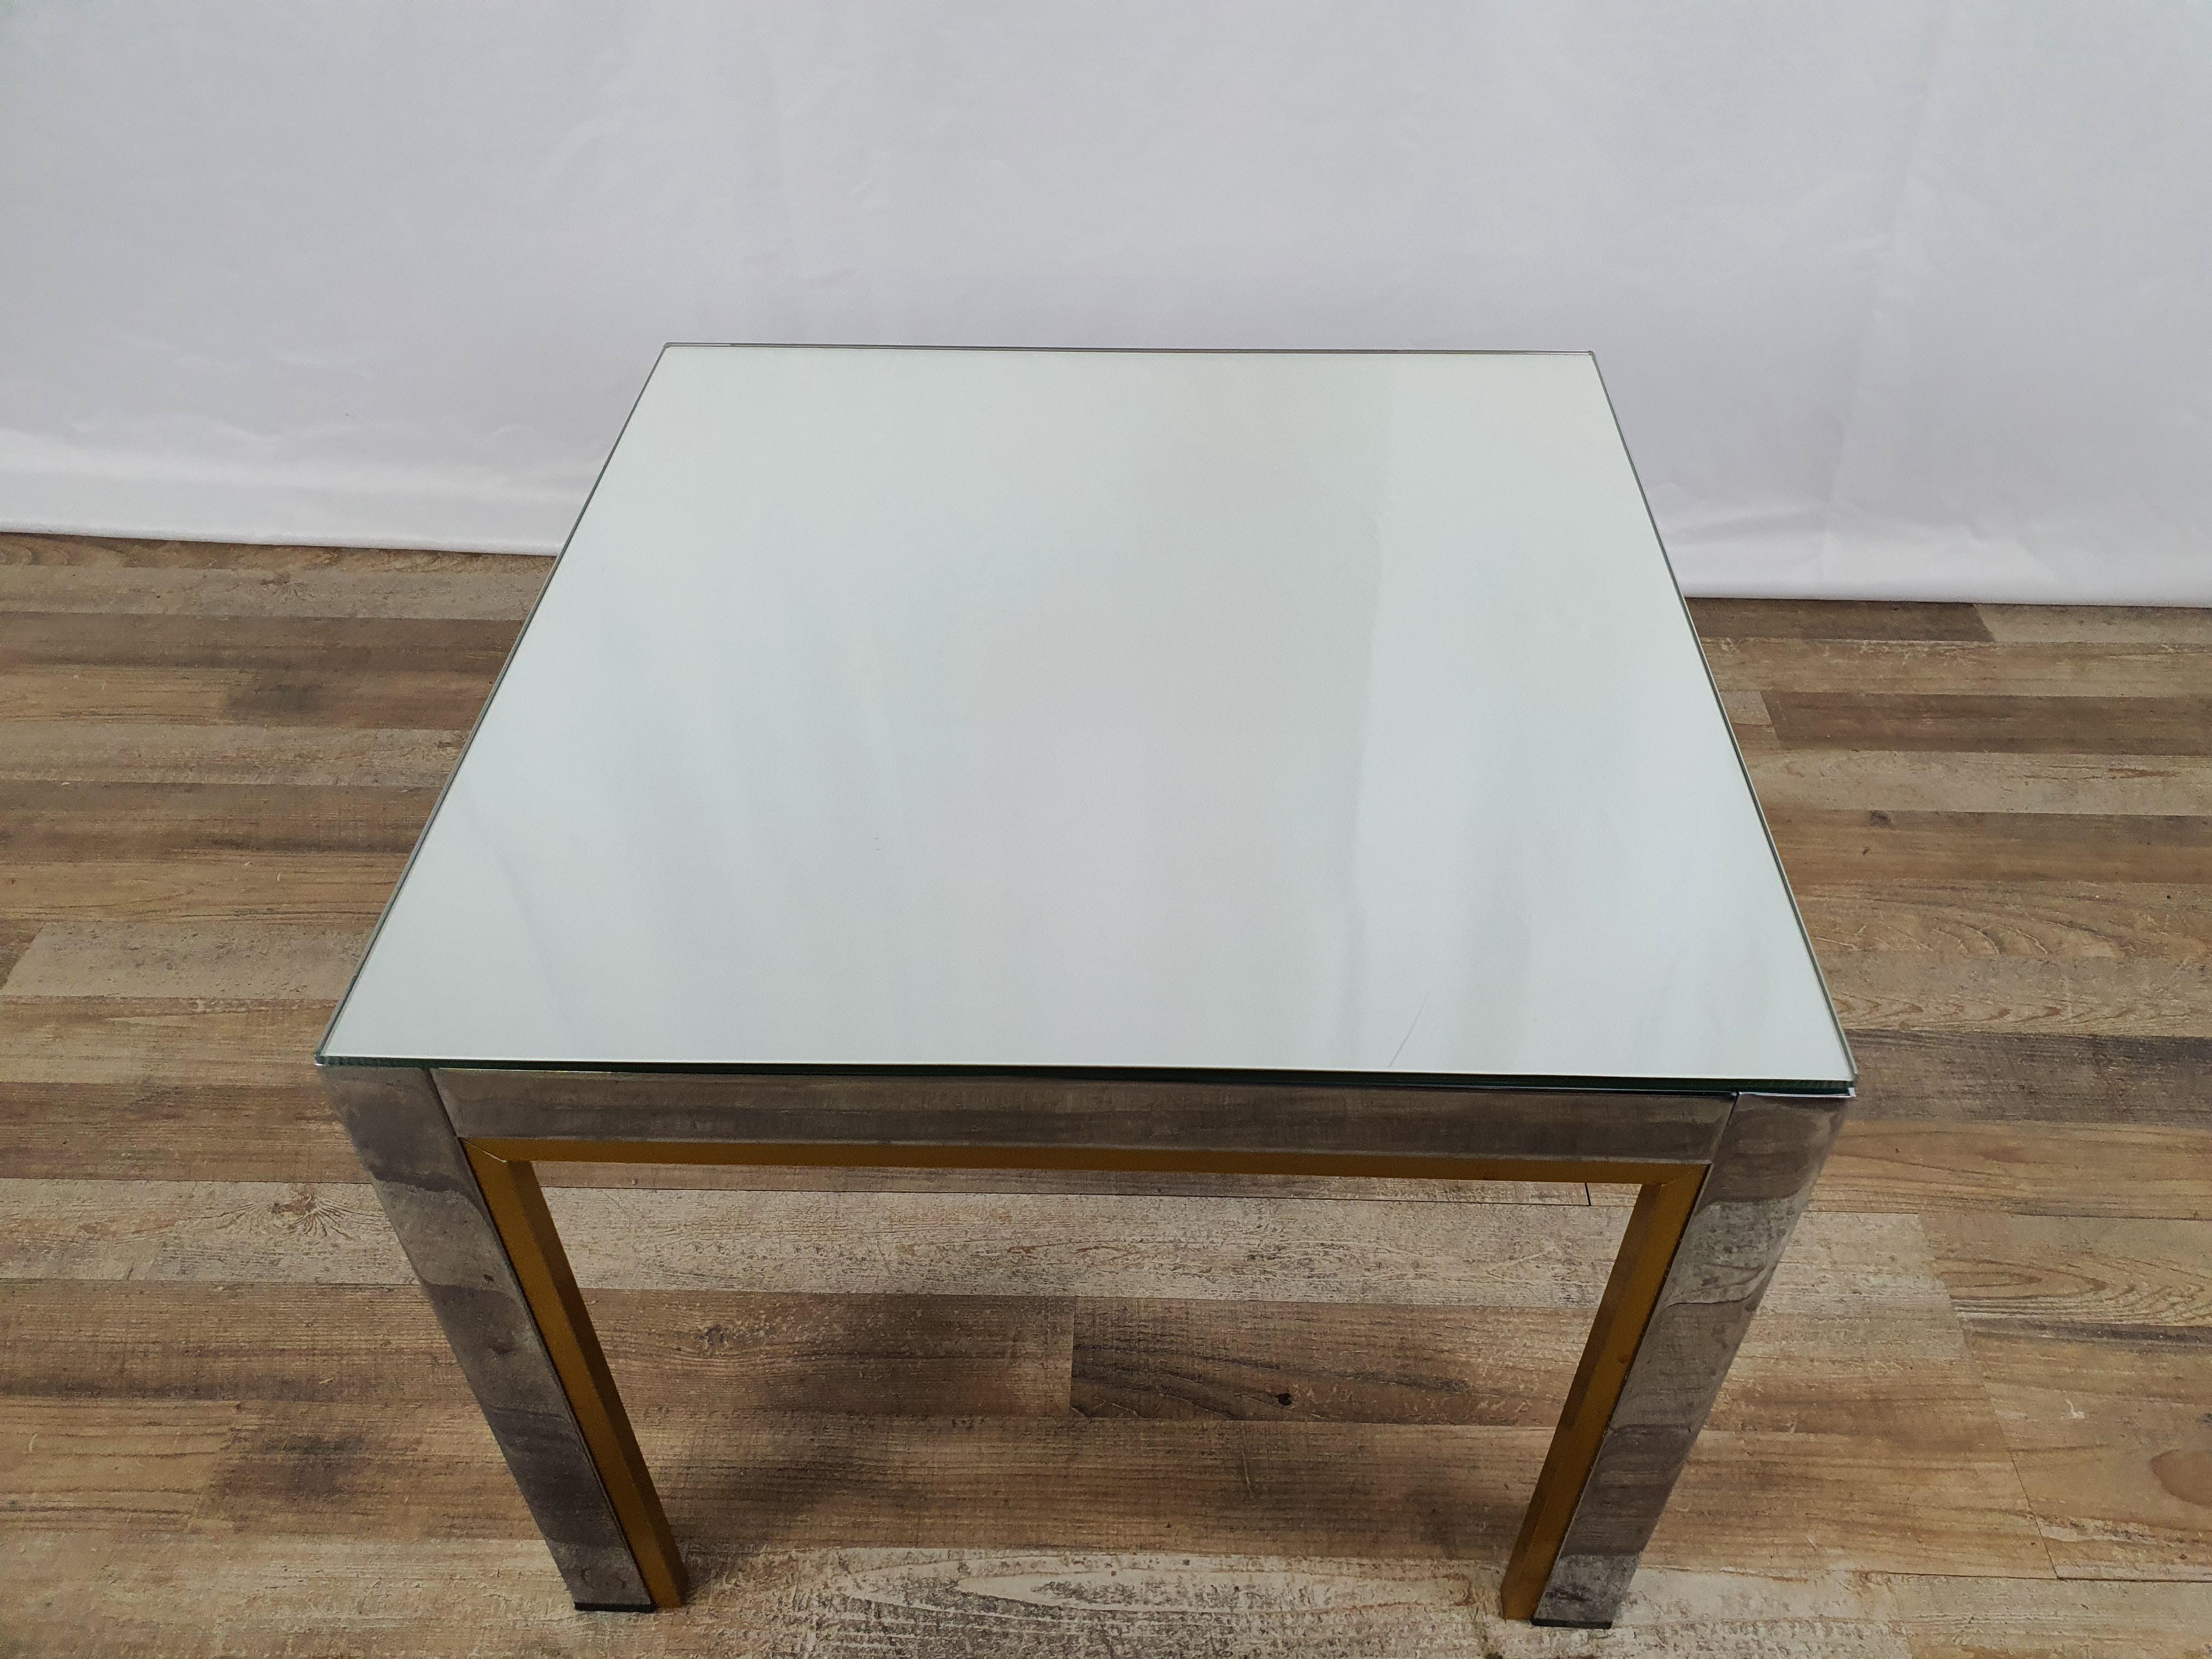 Vintage 70s coffee table with mirror top and steel structure with chrome and gold details.

Ideal for all kinds of environments, from modern to antique, thanks to the linear and compact dimensions.

The coffee table has normal signs of wear